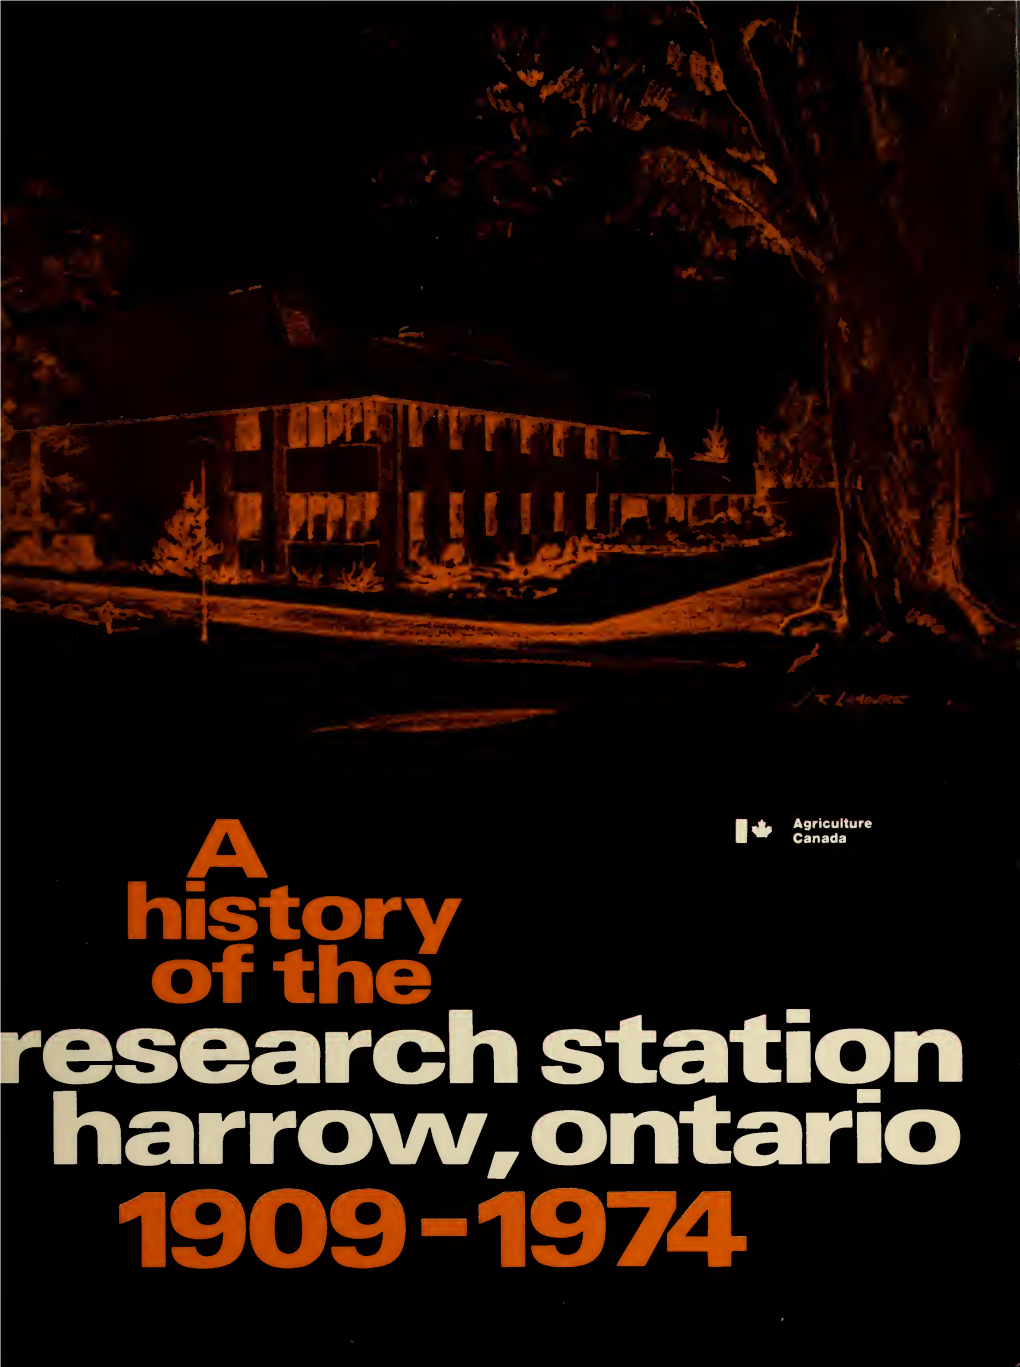 A History of the Research Station, Harrow, Ontario, 1909-1974